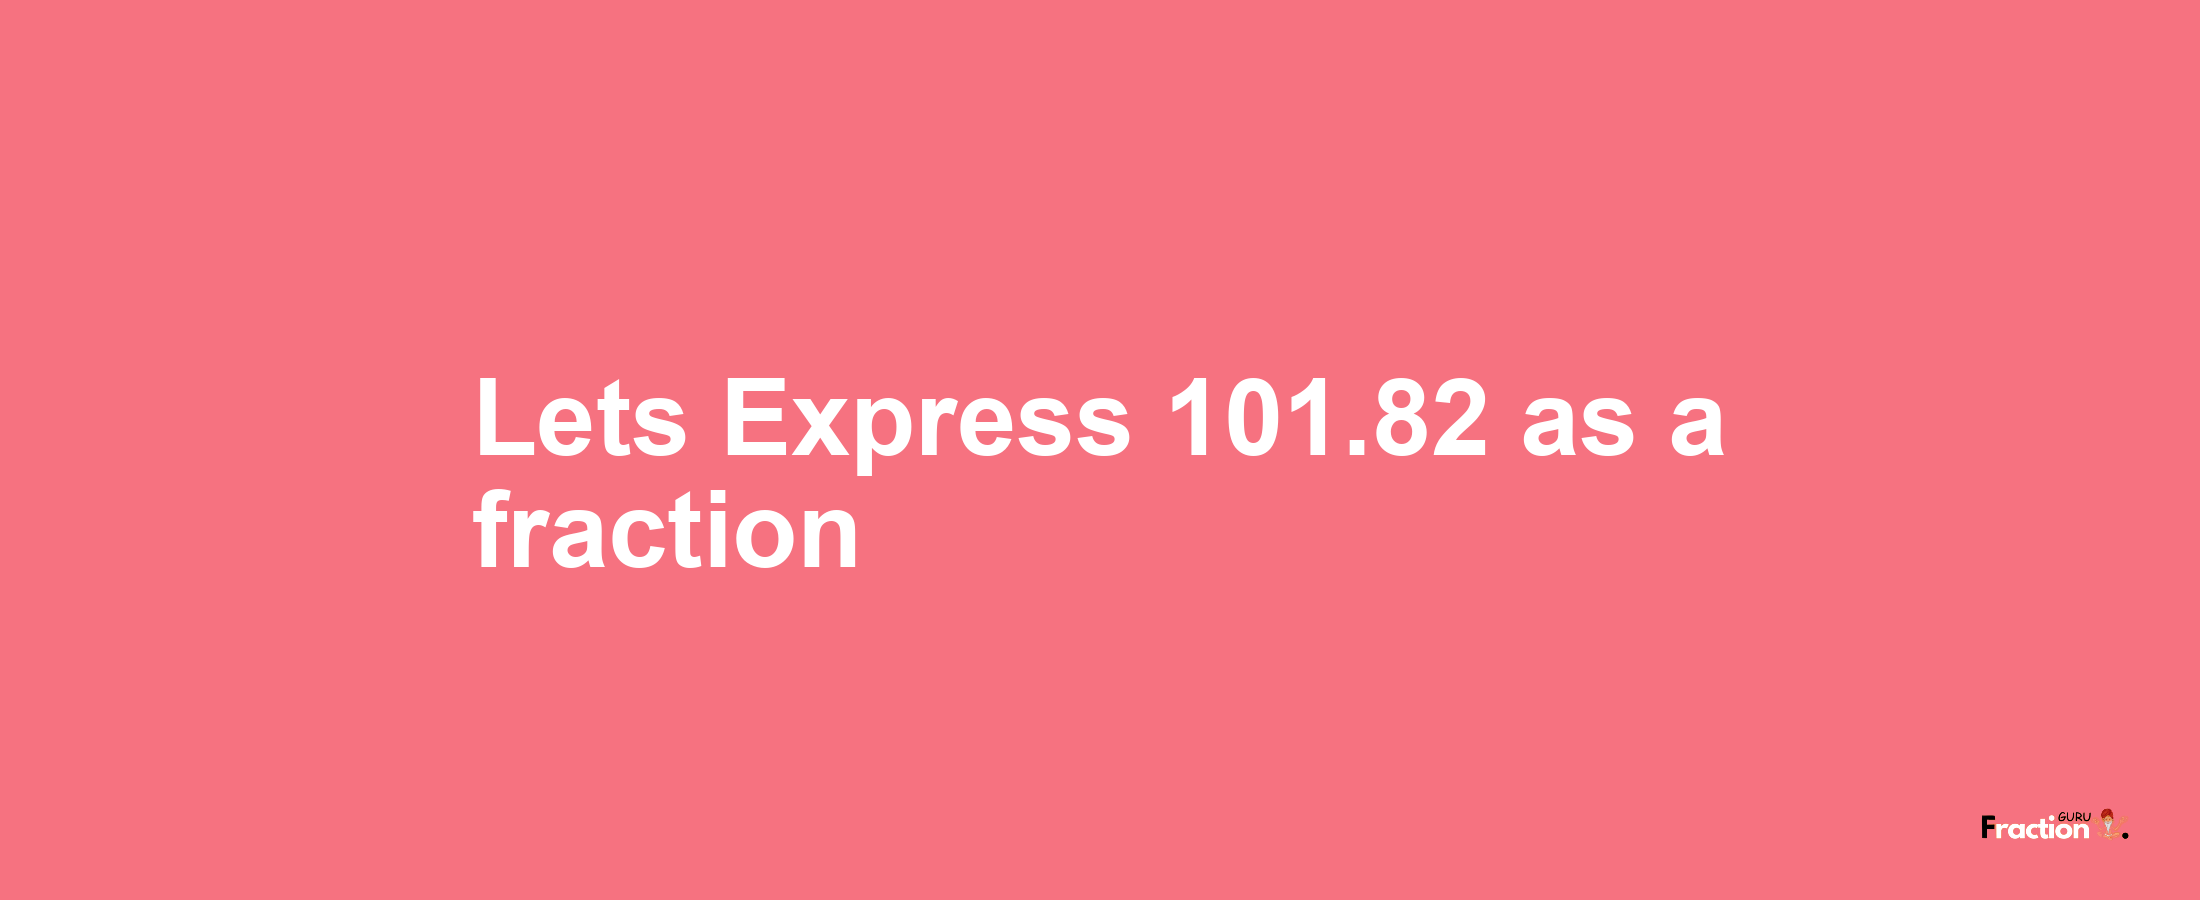 Lets Express 101.82 as afraction